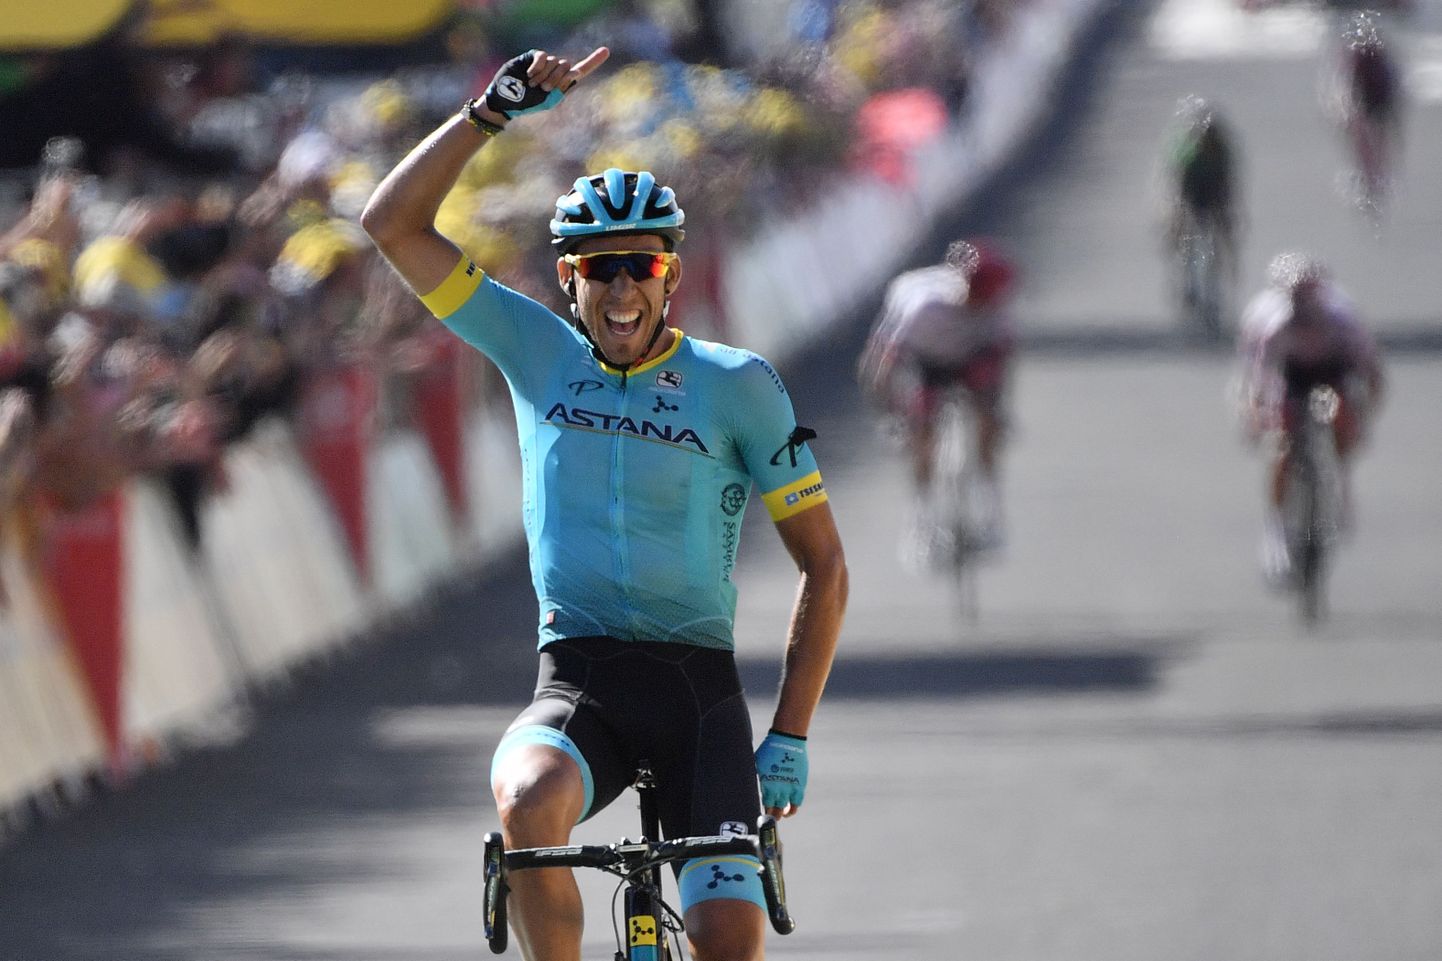 TOPSHOT - Spain's Omar Fraile celebrates a she crosses the finish line to win the 14th stage of the 105th edition of the Tour de France cycling race, between Saint-Paul-Trois-Chateaux and Mende on July 21, 2018. / AFP PHOTO / Jeff PACHOUD / ALTERNATIVE CROP